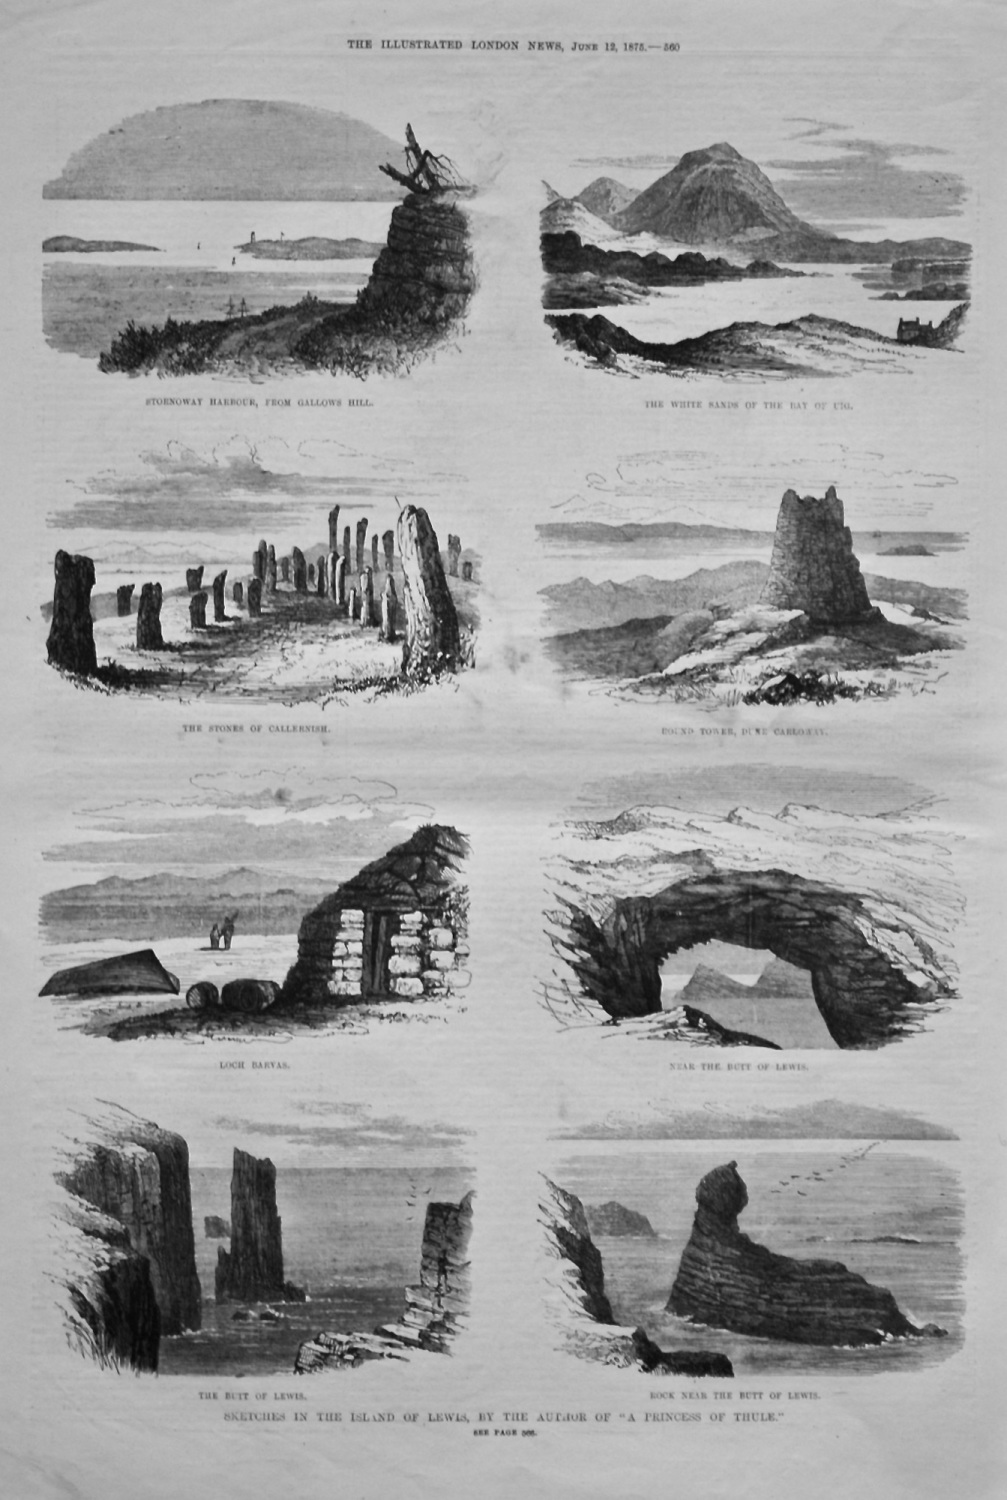 Sketches in the Island of Lewis, by the Author of 